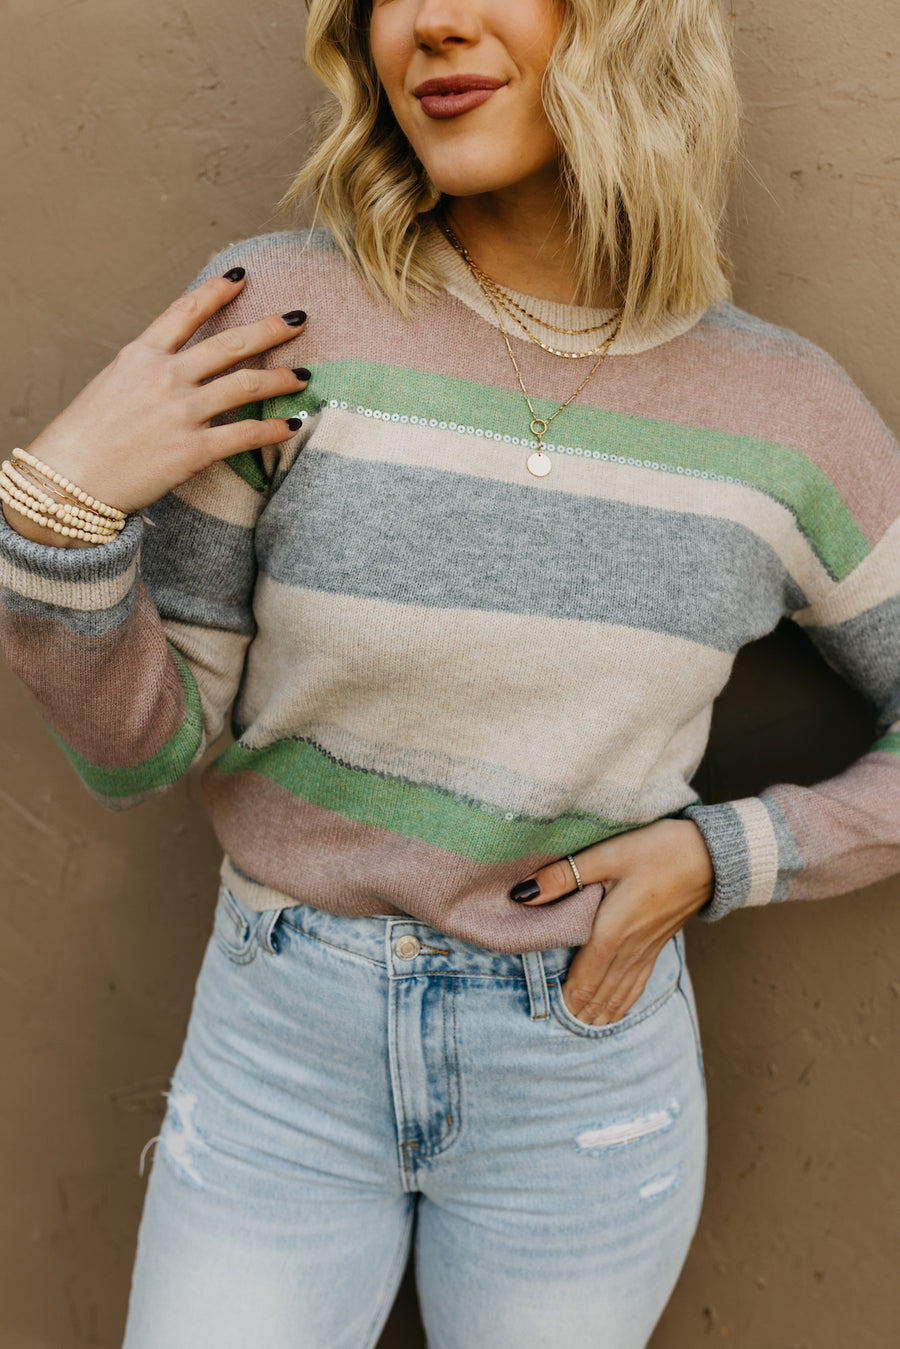 The Cameron Sequin Striped Sweater  - FINAL SALE